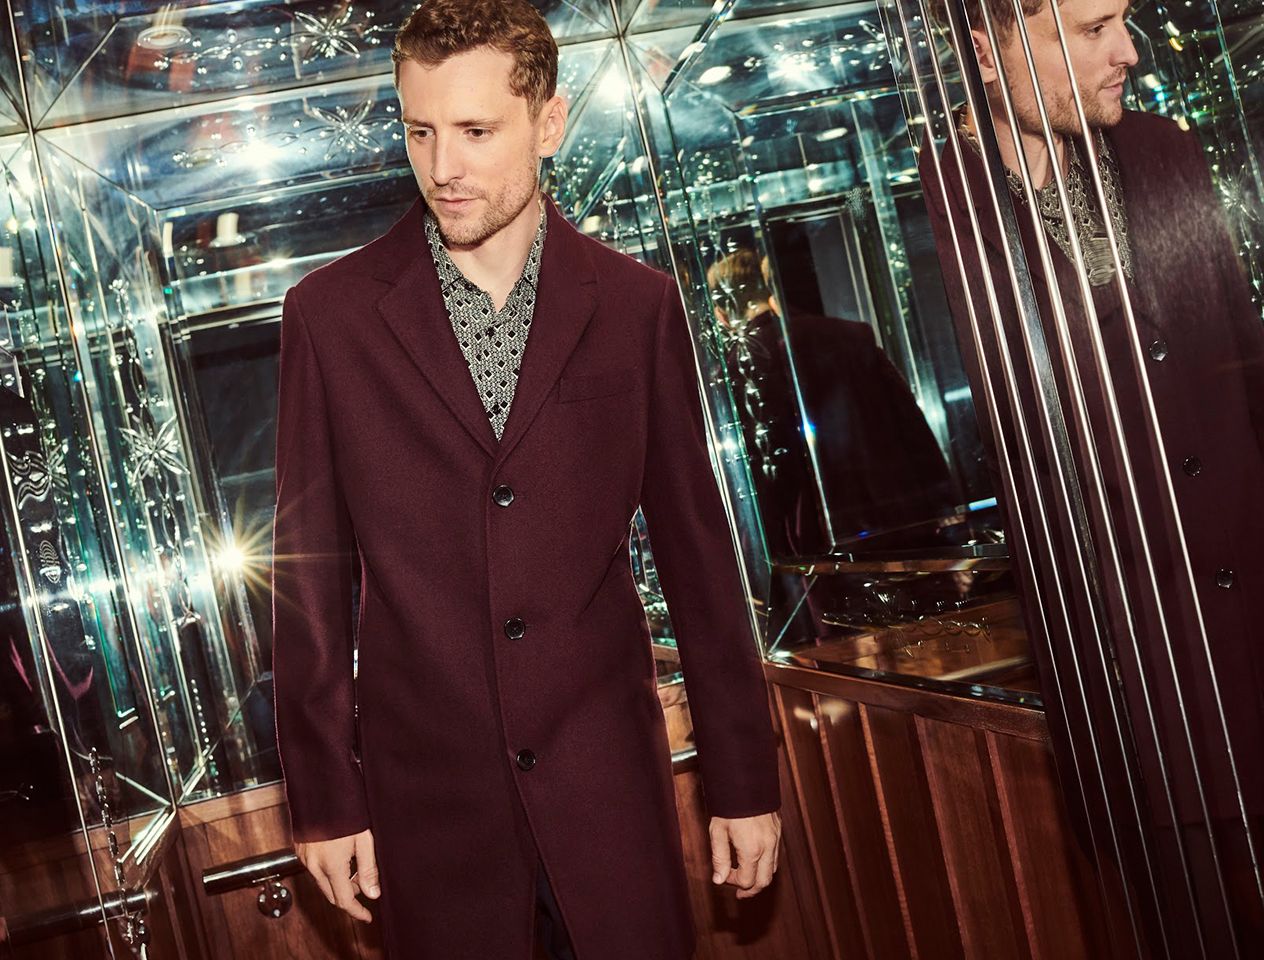 Welcoming 2022 in Style: The New Year's Eve Men's Style Guide